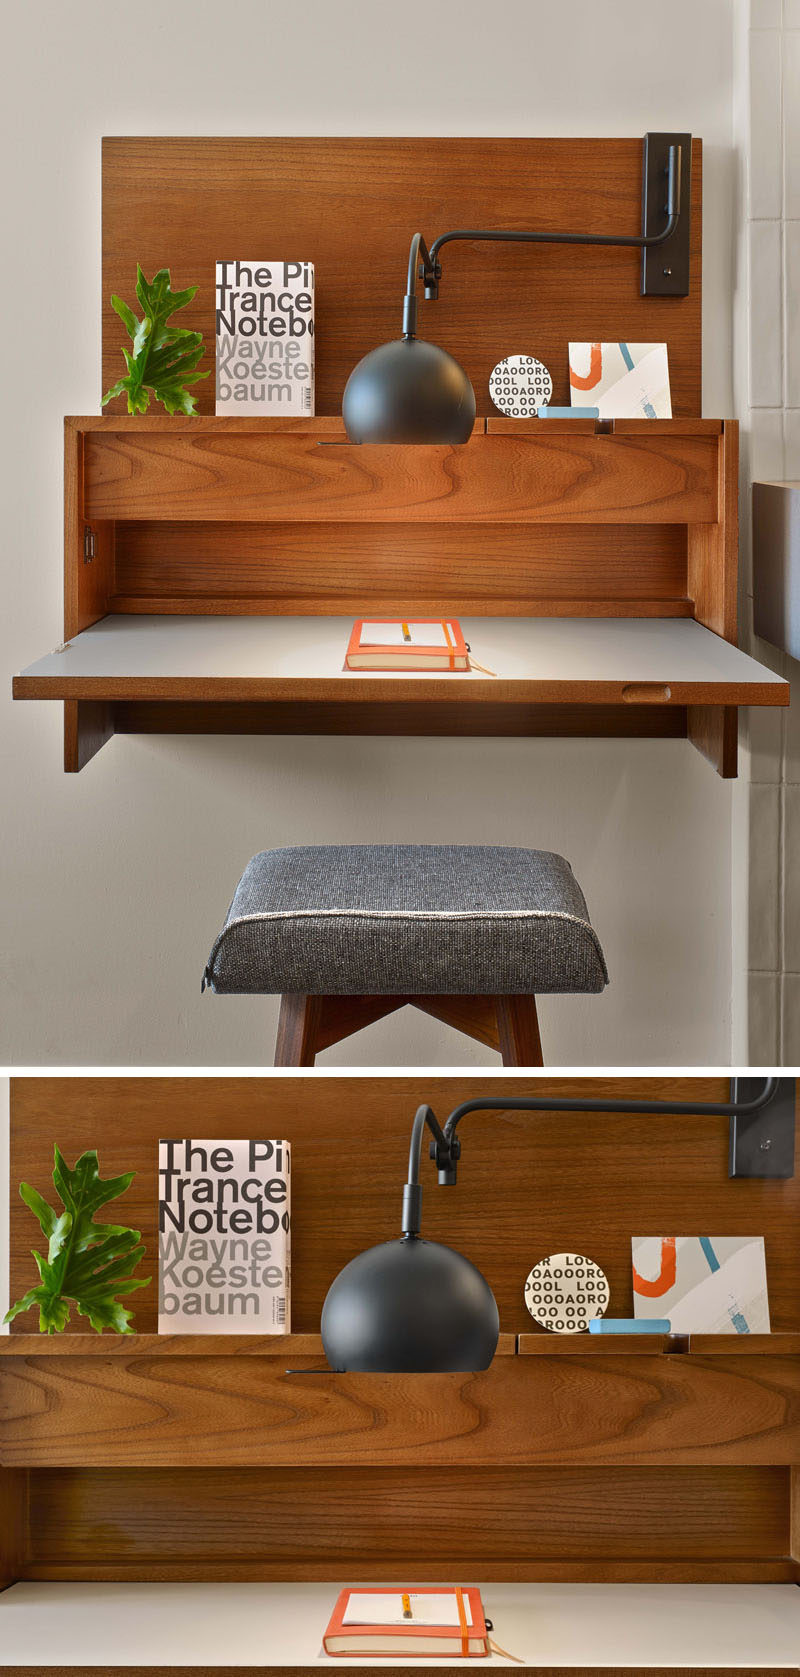 This small wall mounted desk was included in the design of a hotel room.